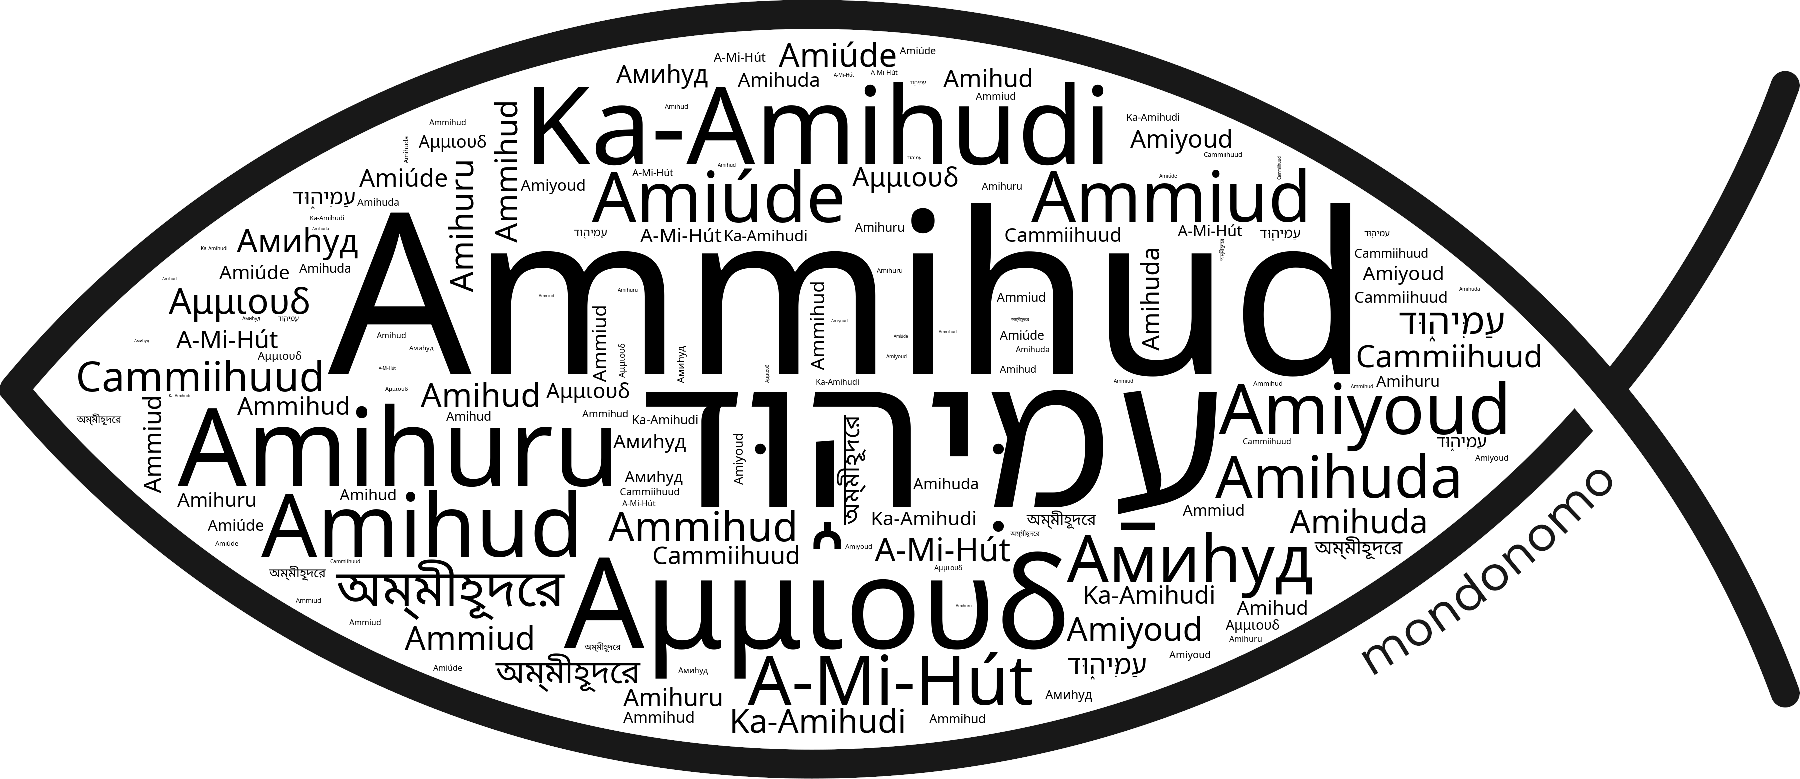 Name Ammihud in the world's Bibles